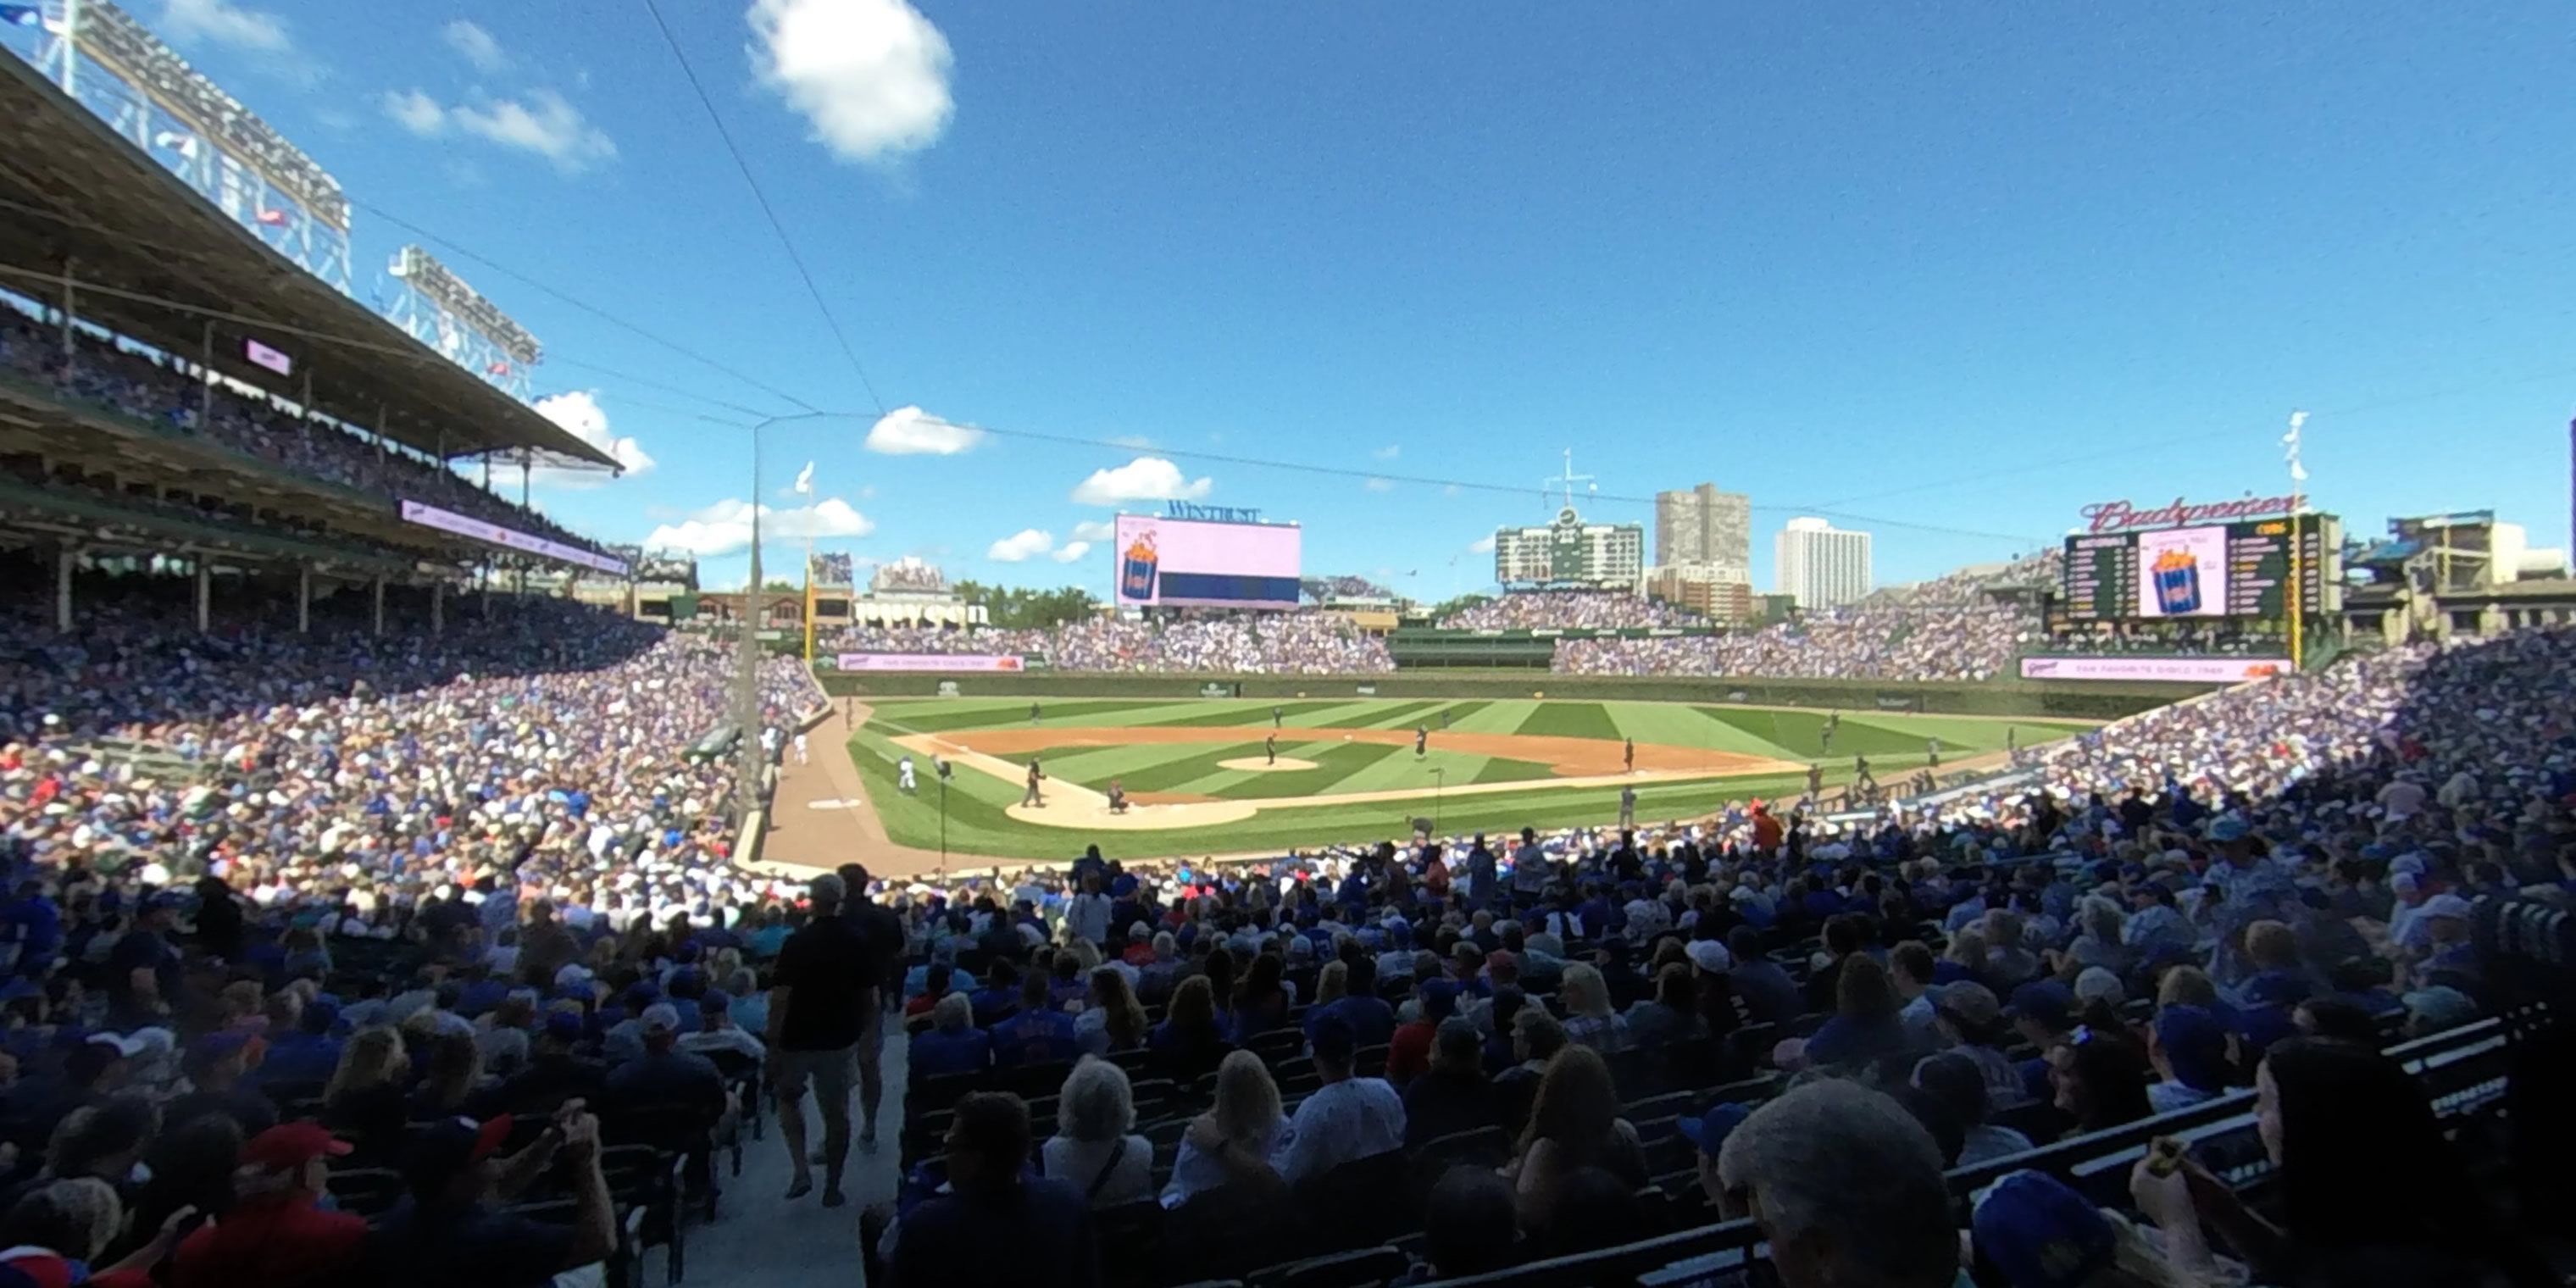 section 119 panoramic seat view  for baseball - wrigley field